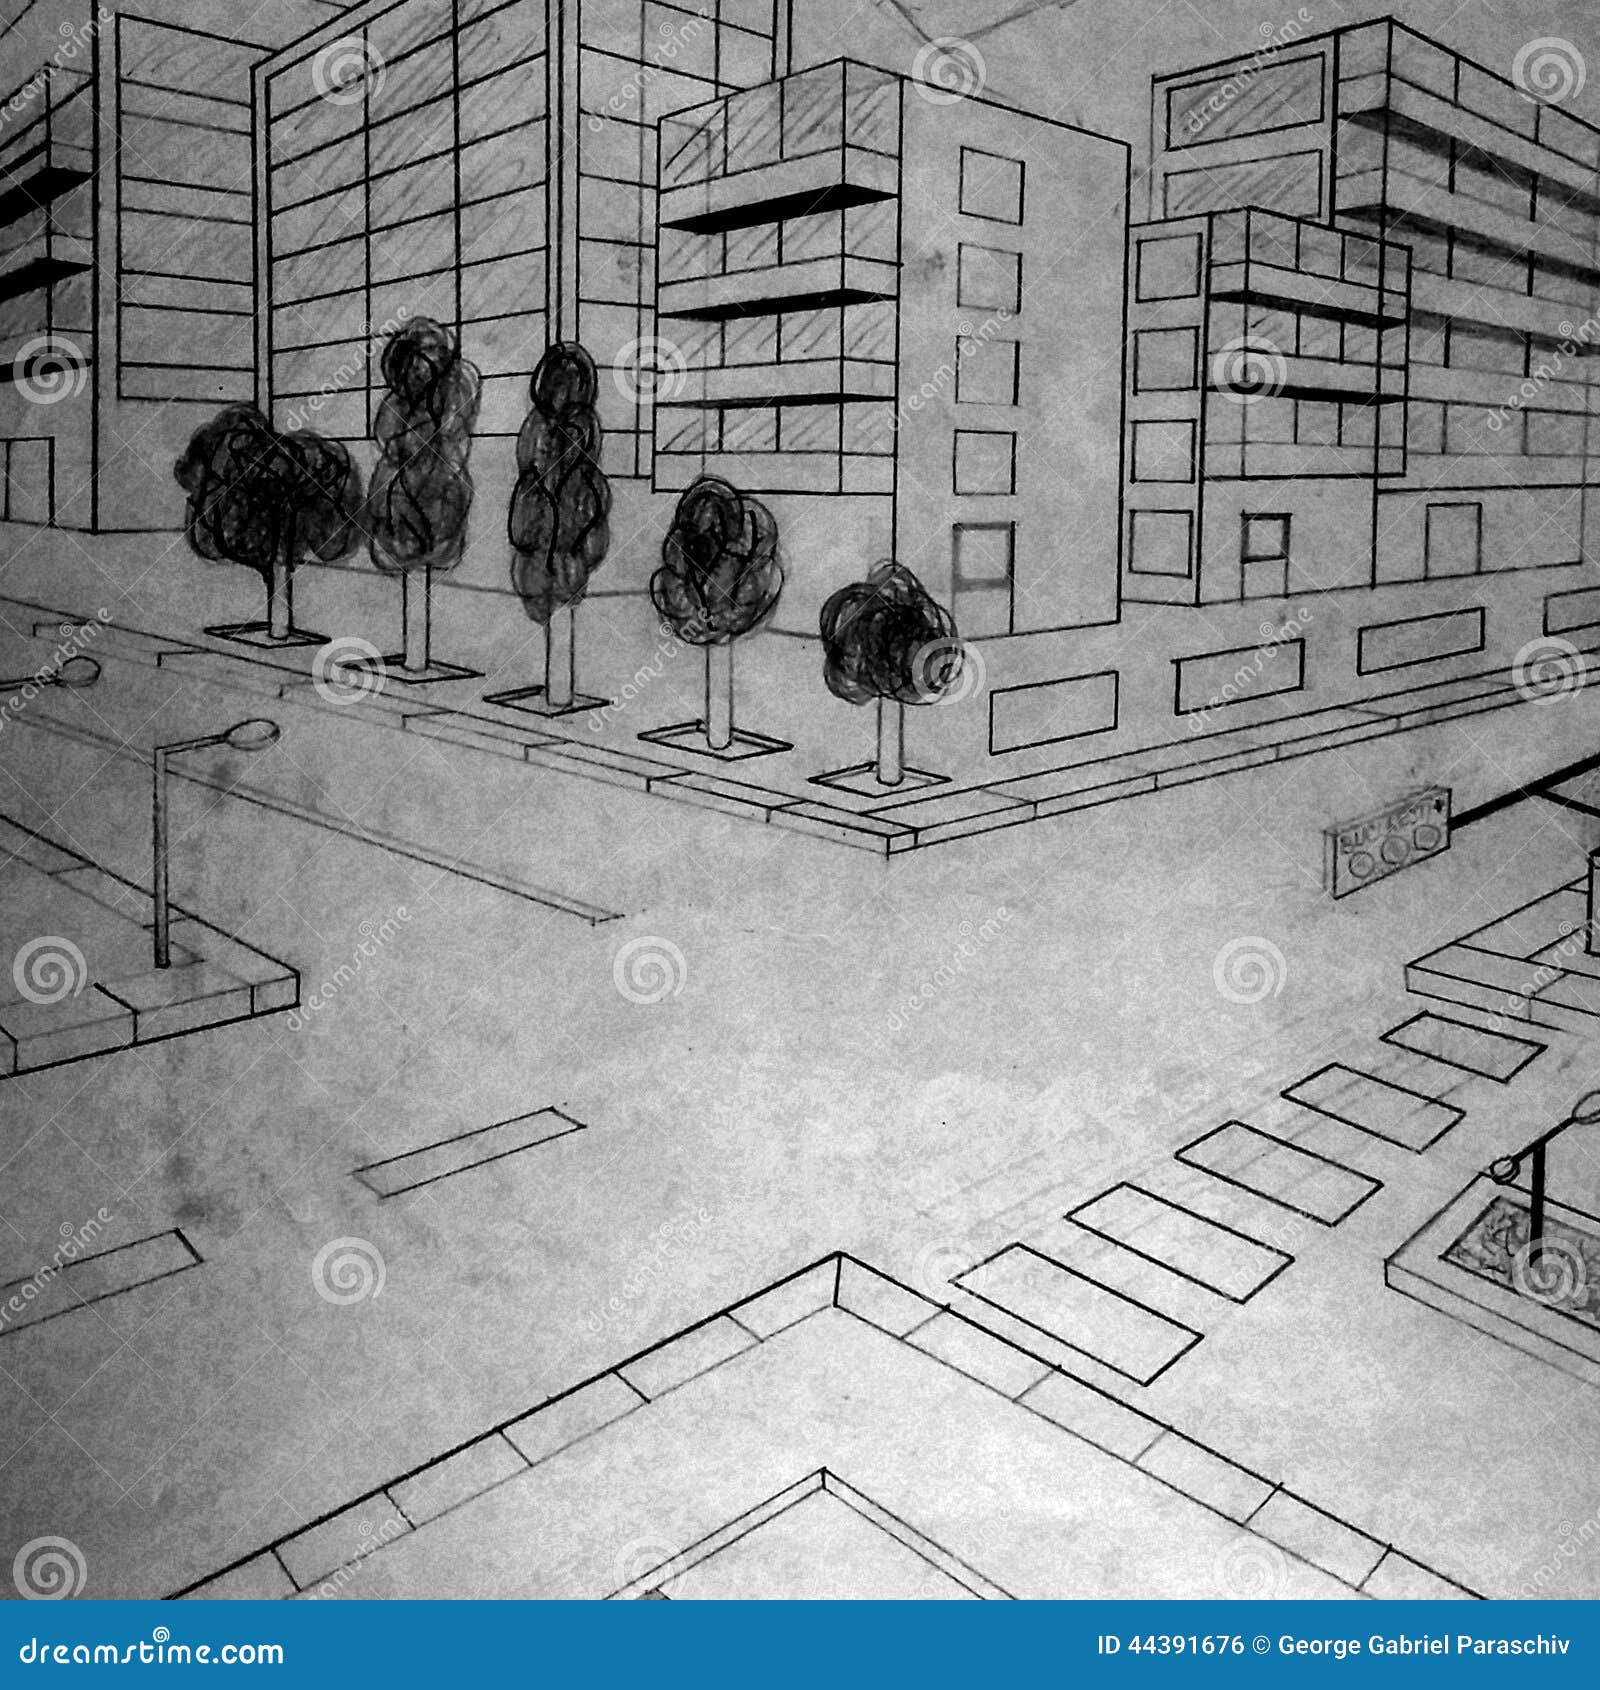 Retro city sketch, street, buildings and old cars vector illustration,  pencil on paper style, Canvas Print | Barewalls Posters & Prints |  bwc11875809